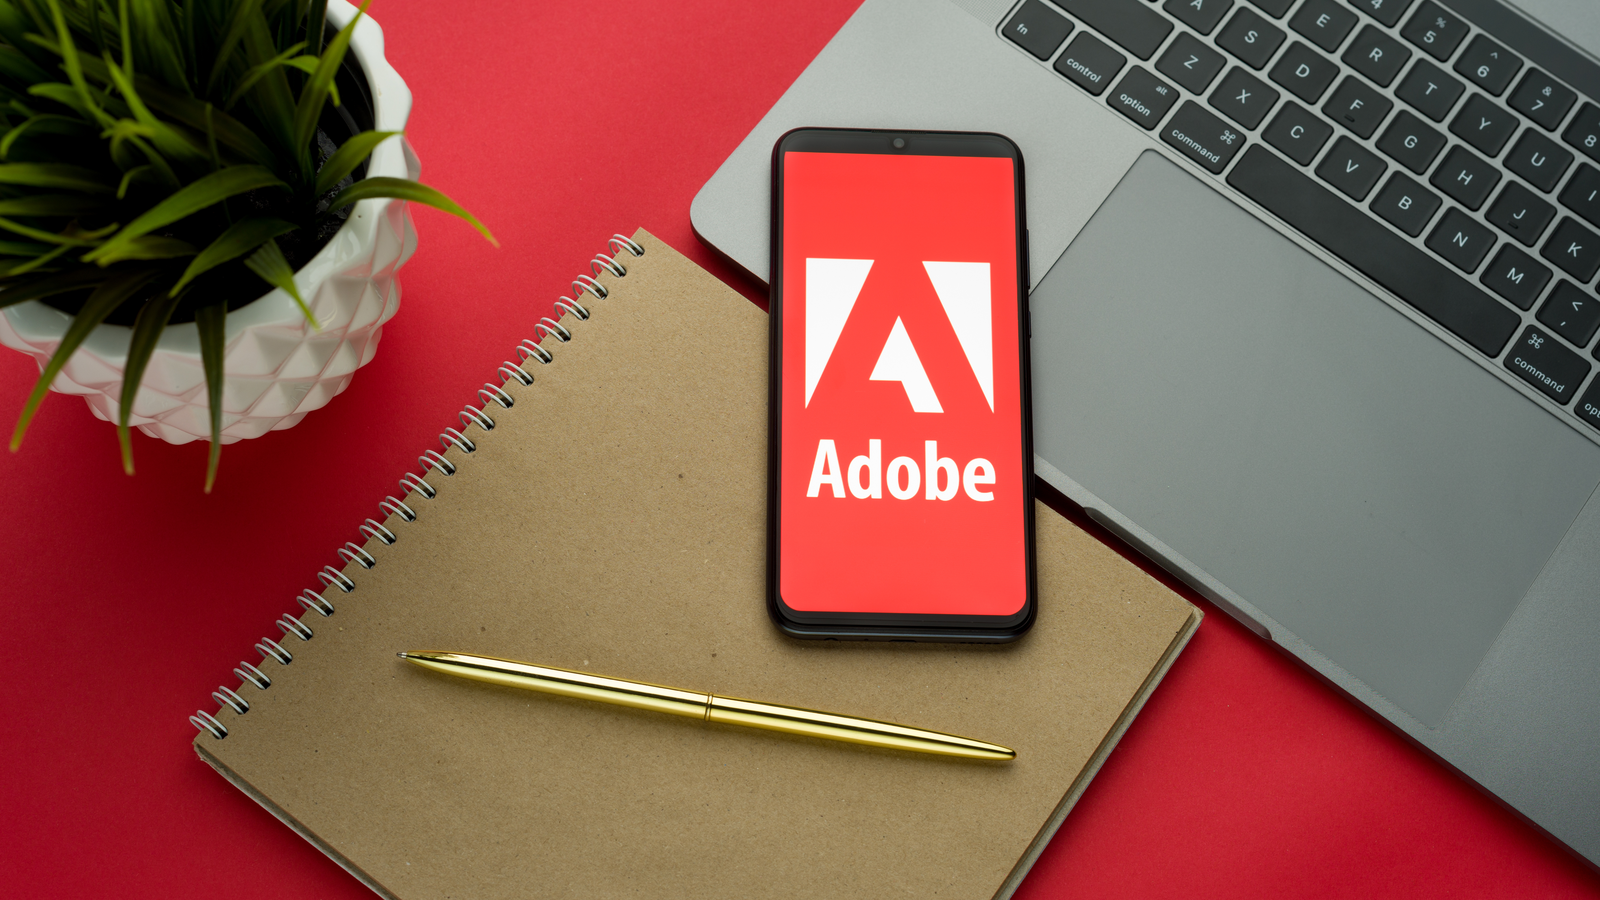 Adobe logo on the smartphone screen is placed on the Apple macbook keyboard on red desk background. ADBE stock.